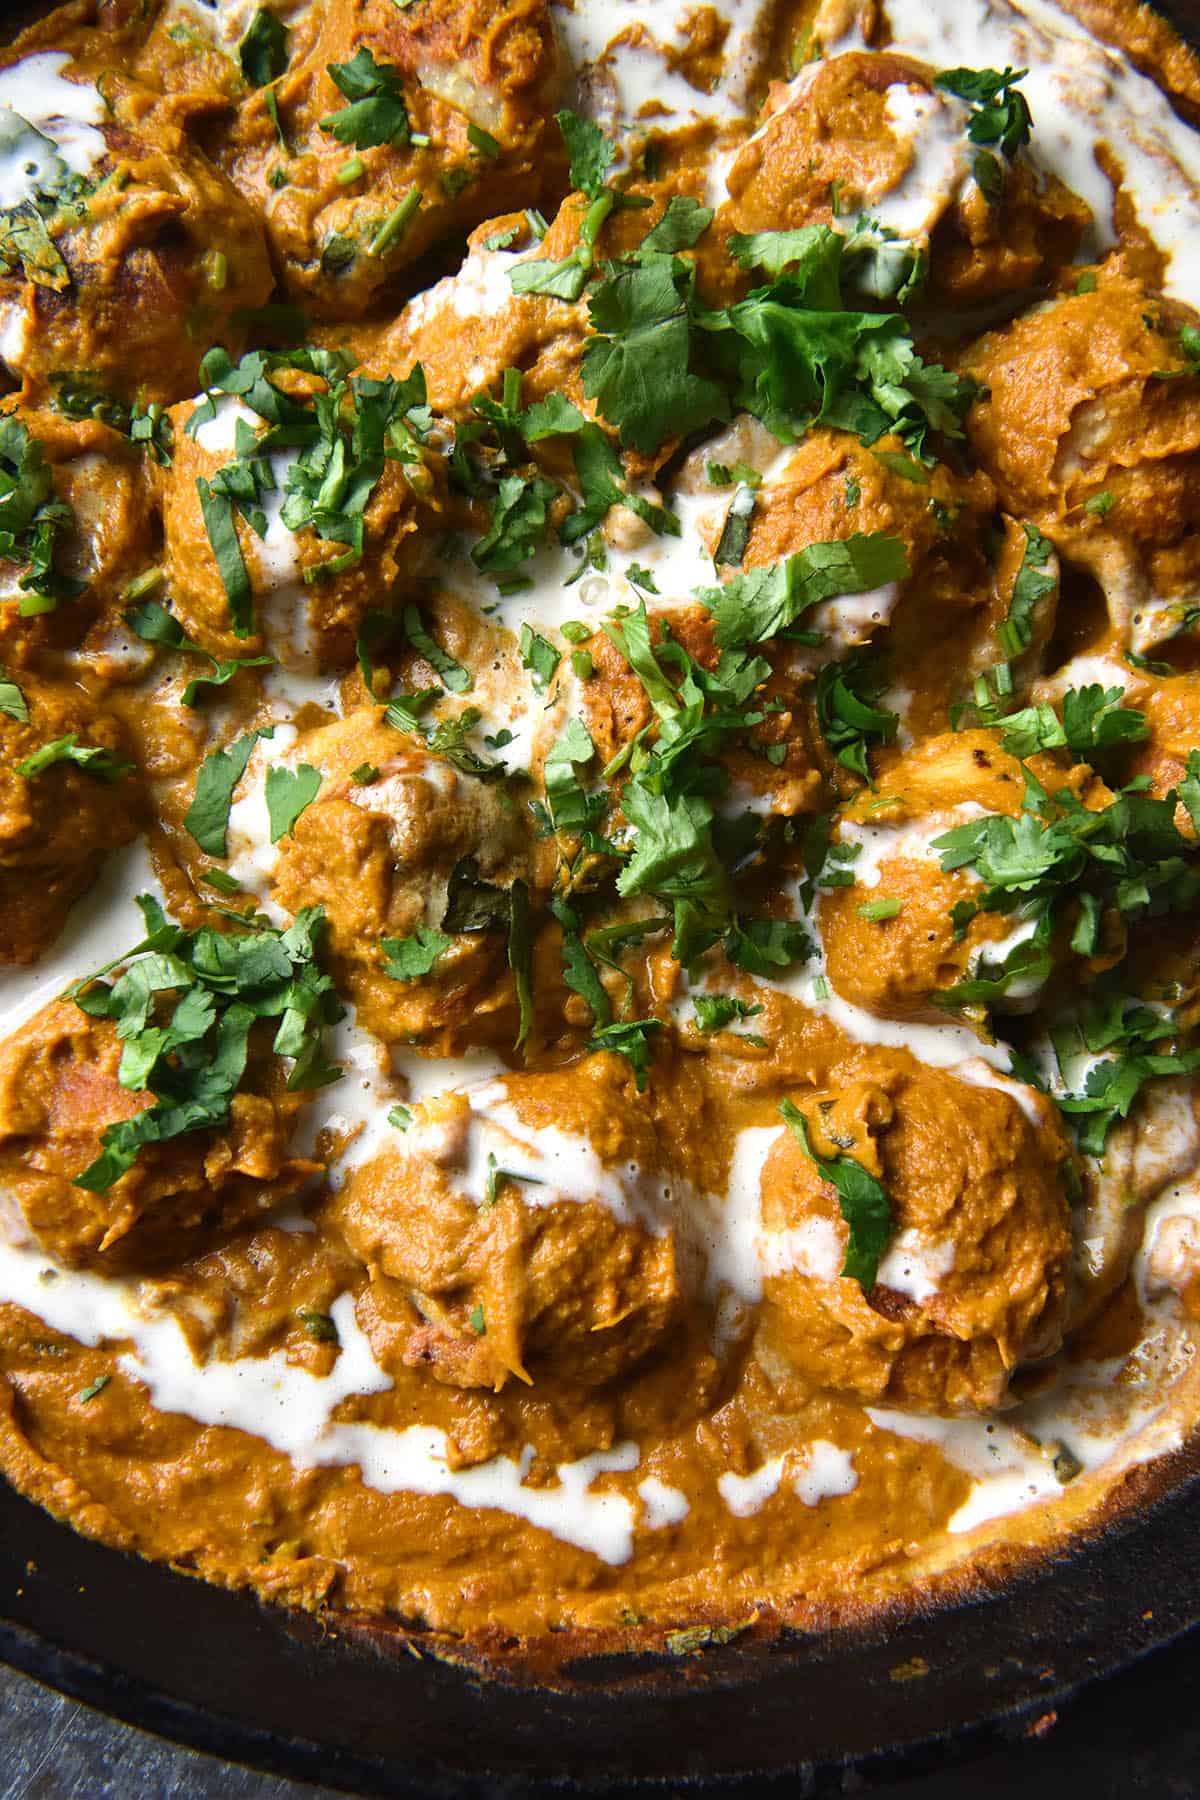 An aerial close up view of a skillet filled with FODMAP friendly Malai kofta. The Malai kofta is topped with cream and coriander